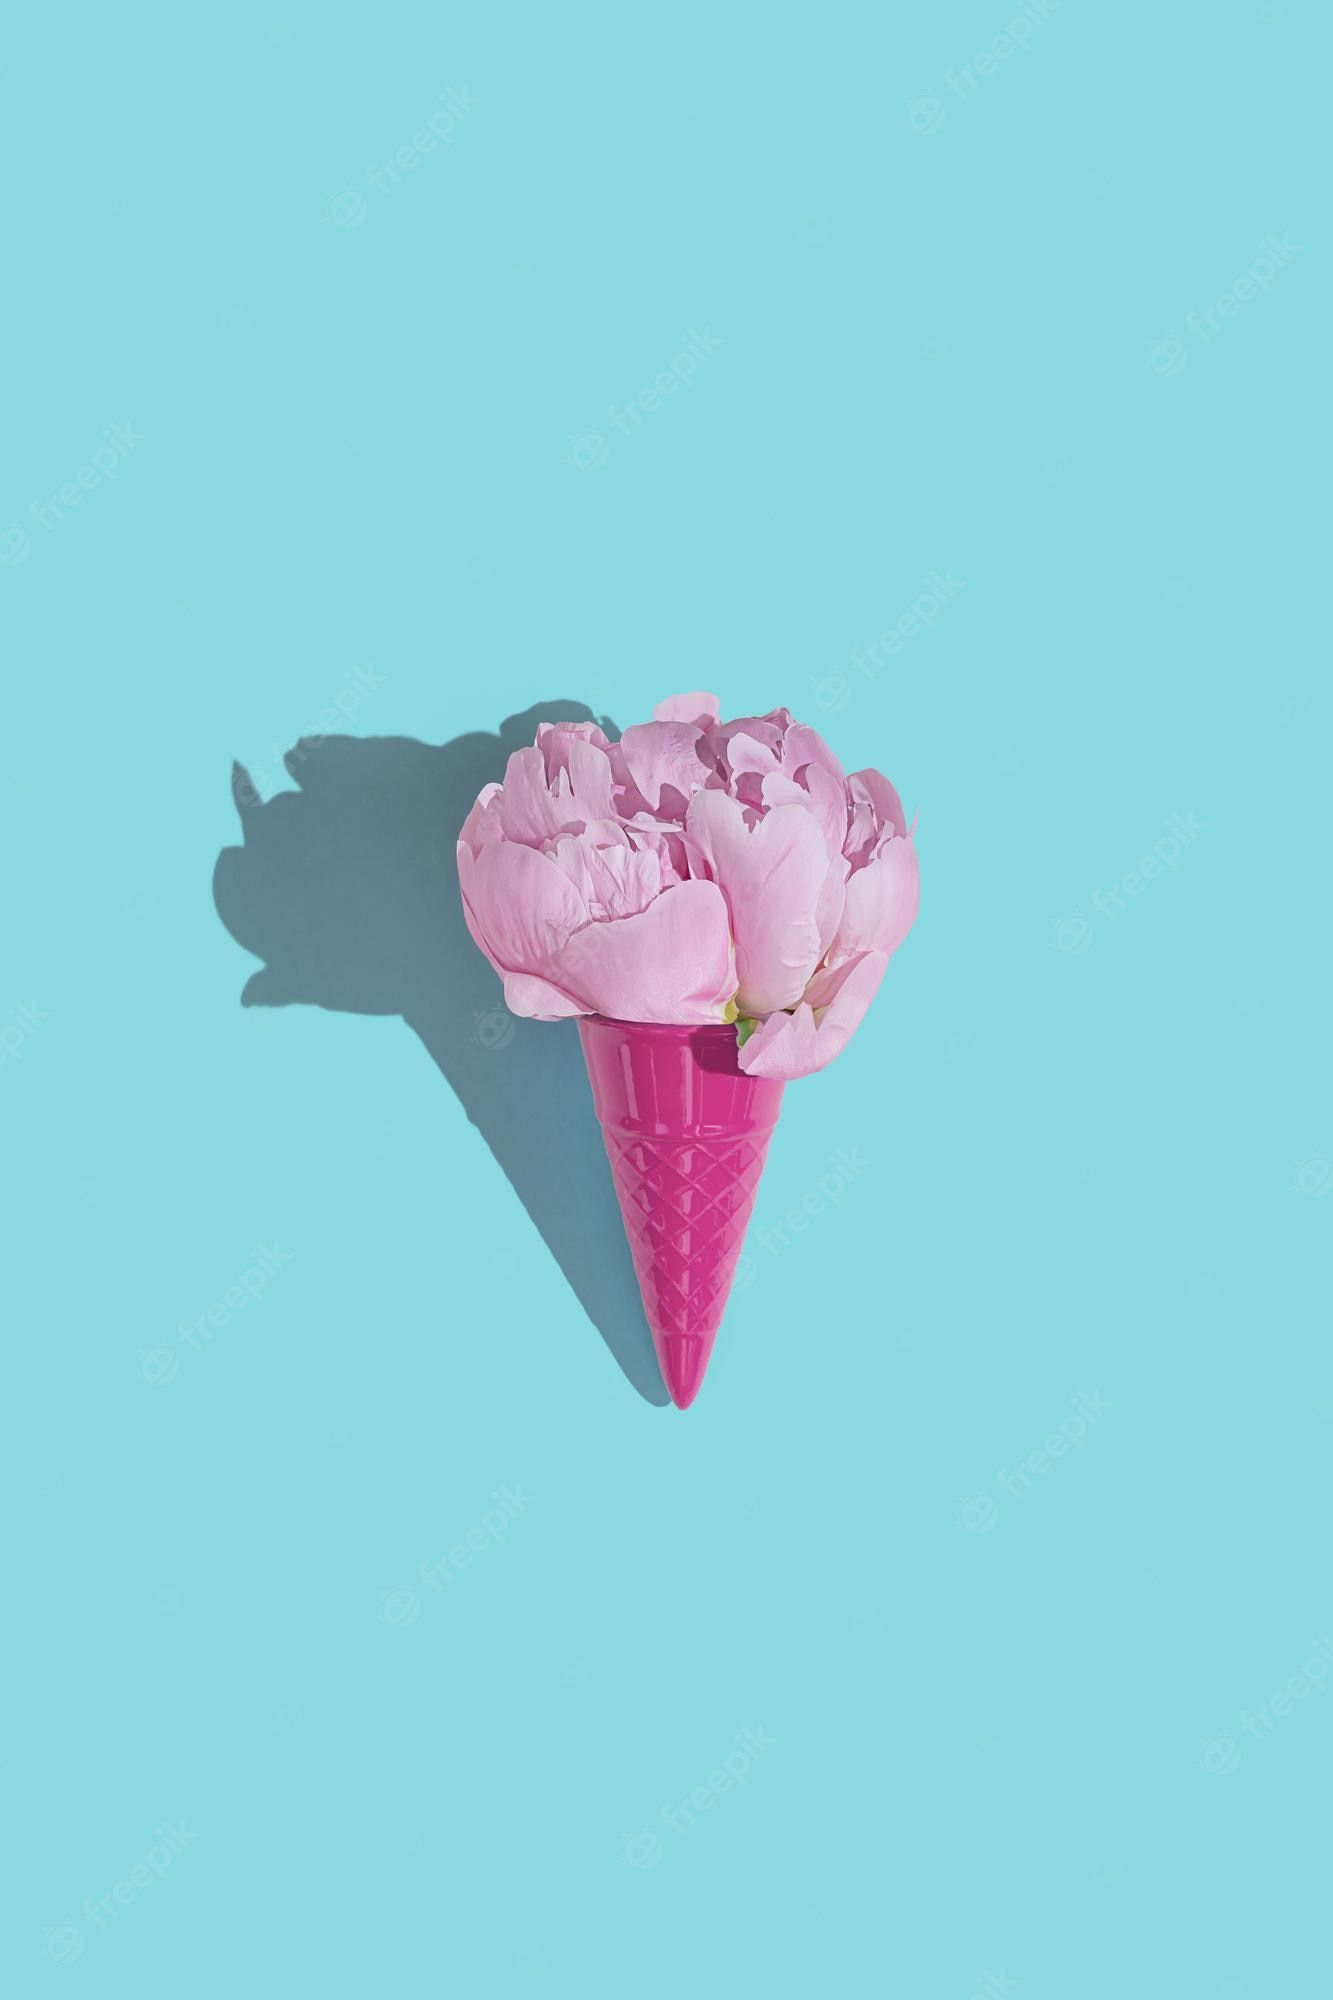 Premium Photo. Creative pink toy ice cream cone with pink peony fluffy flower on blue minimal background with copy space flat lay botany idea for summer or spring wallpaper or greeting